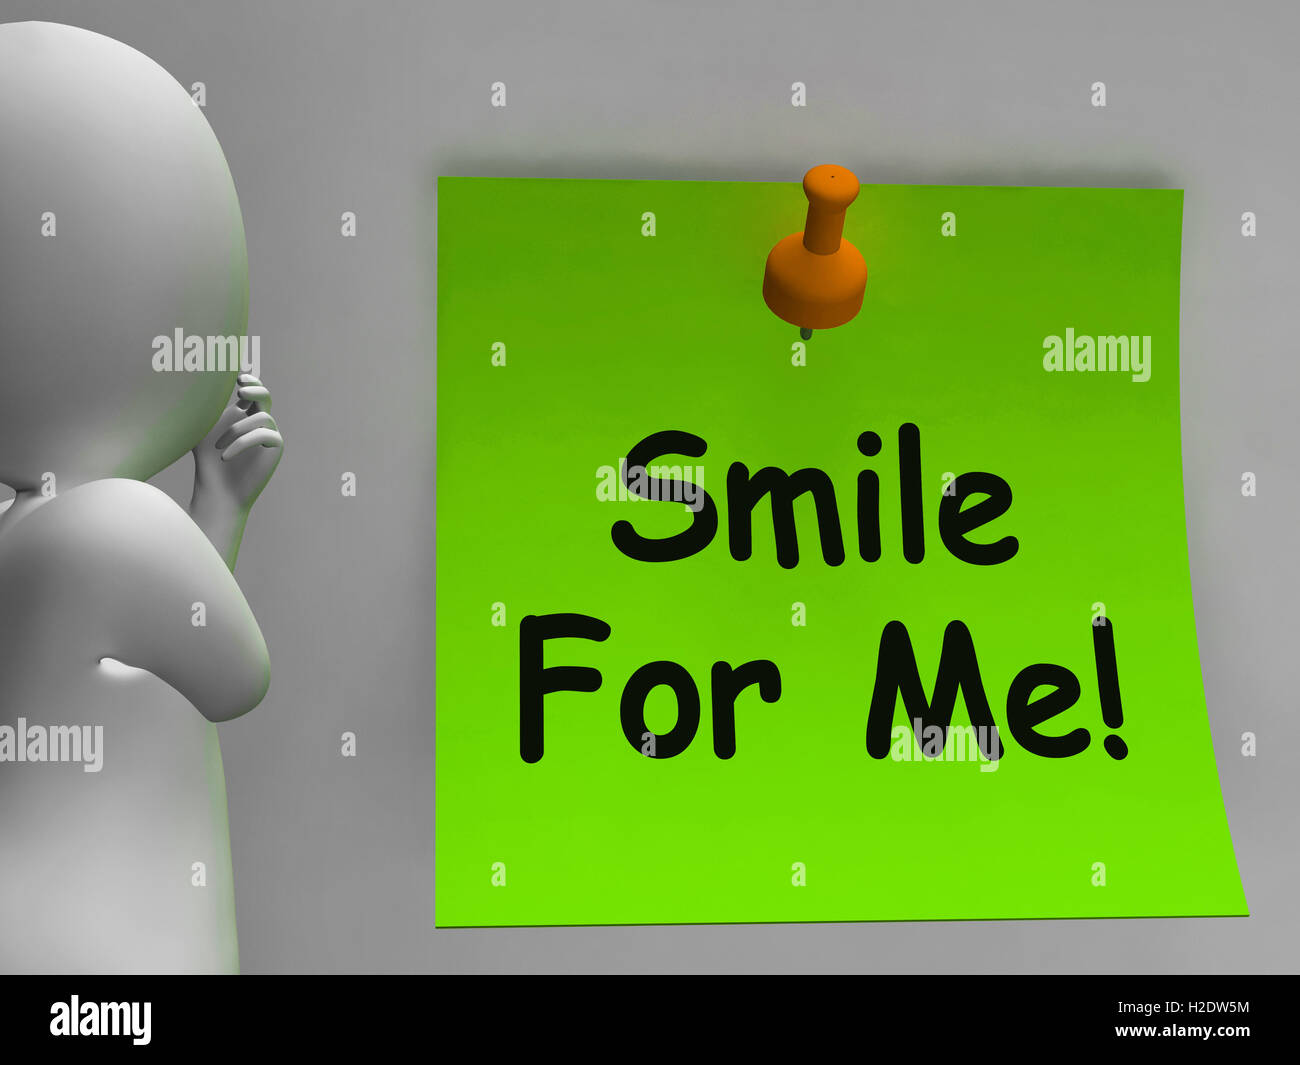 Smile For Me Note Means Be Happy Cheerful Stock Photo